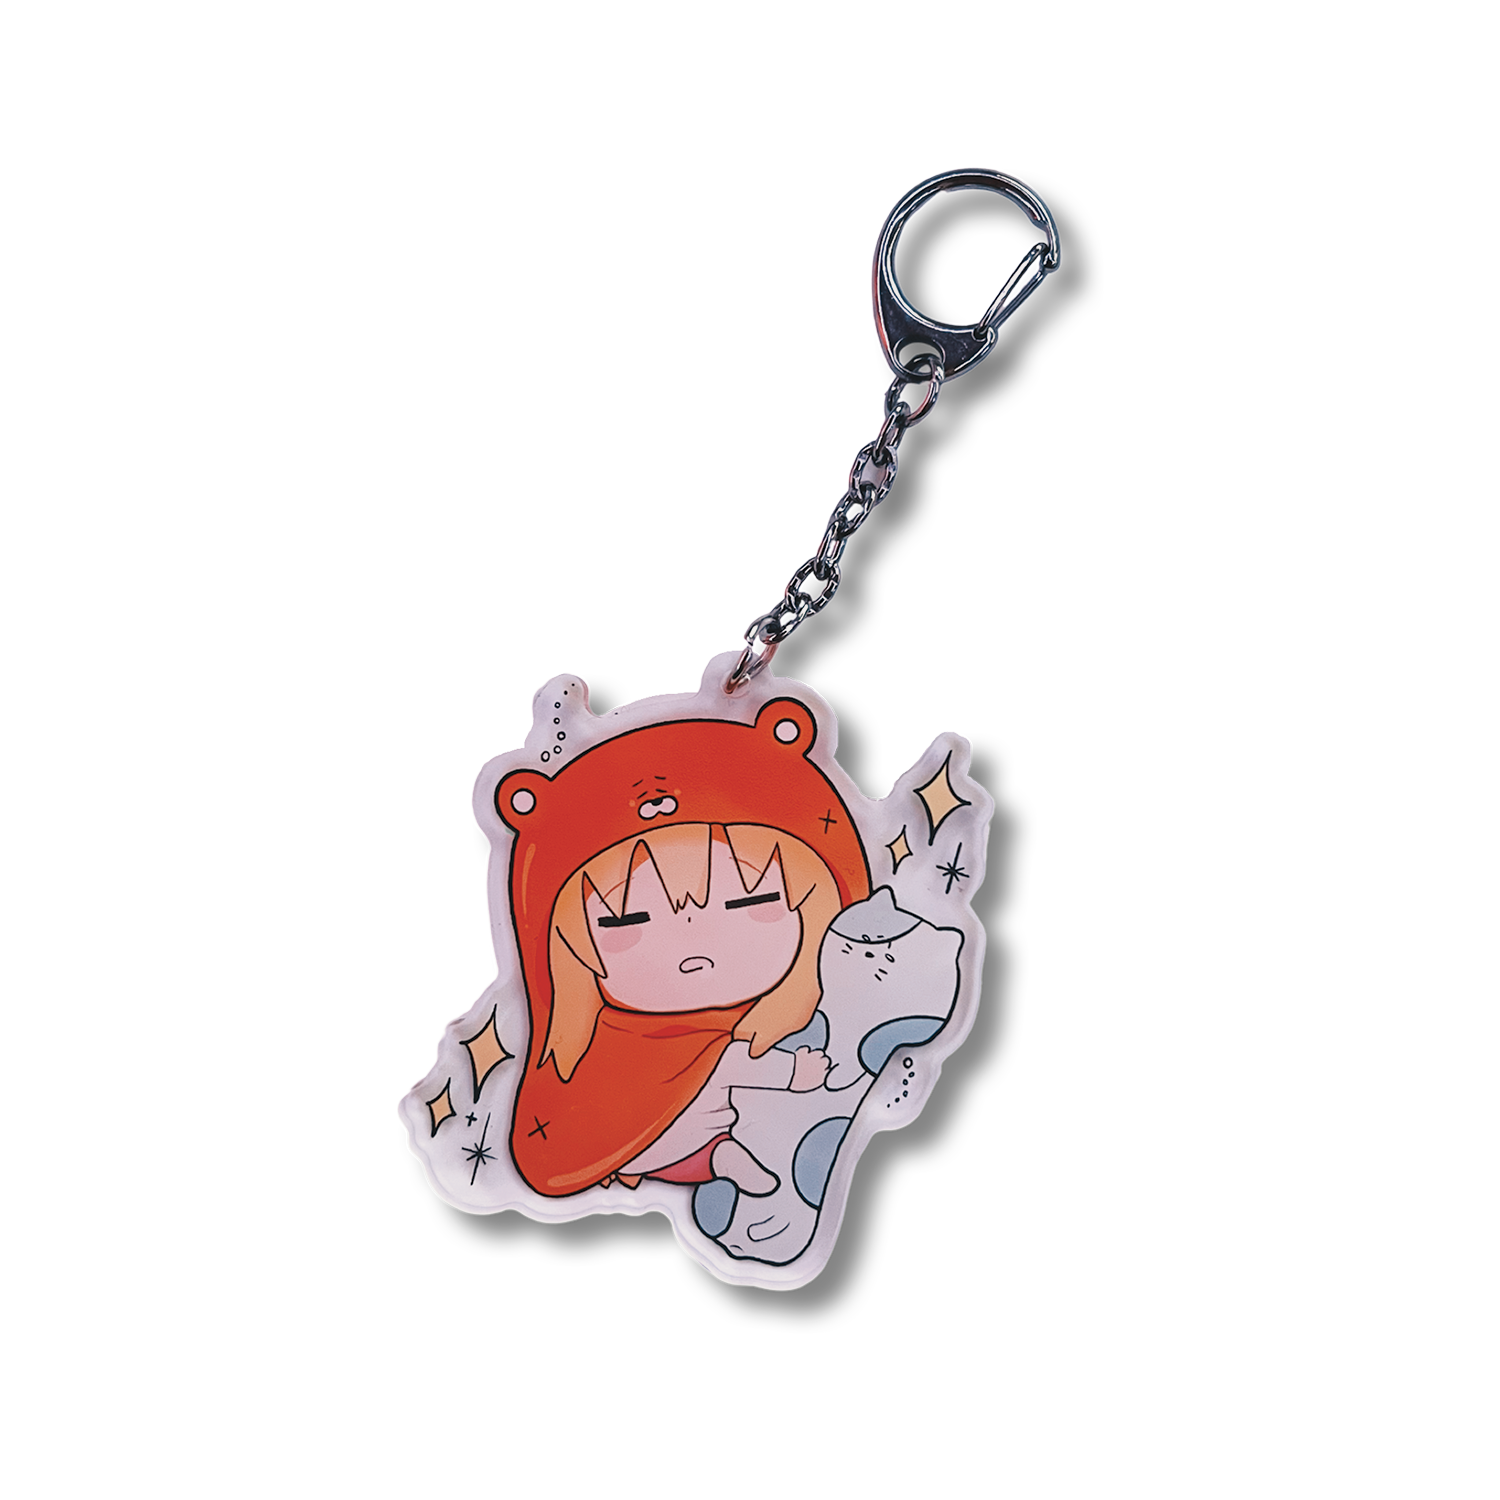 Sleeping Umaru Keychain design features Umaru from Himouto! Umaru-Chan sleeping with her long cat plushie and yellow sparkles on an acrylic keychain.